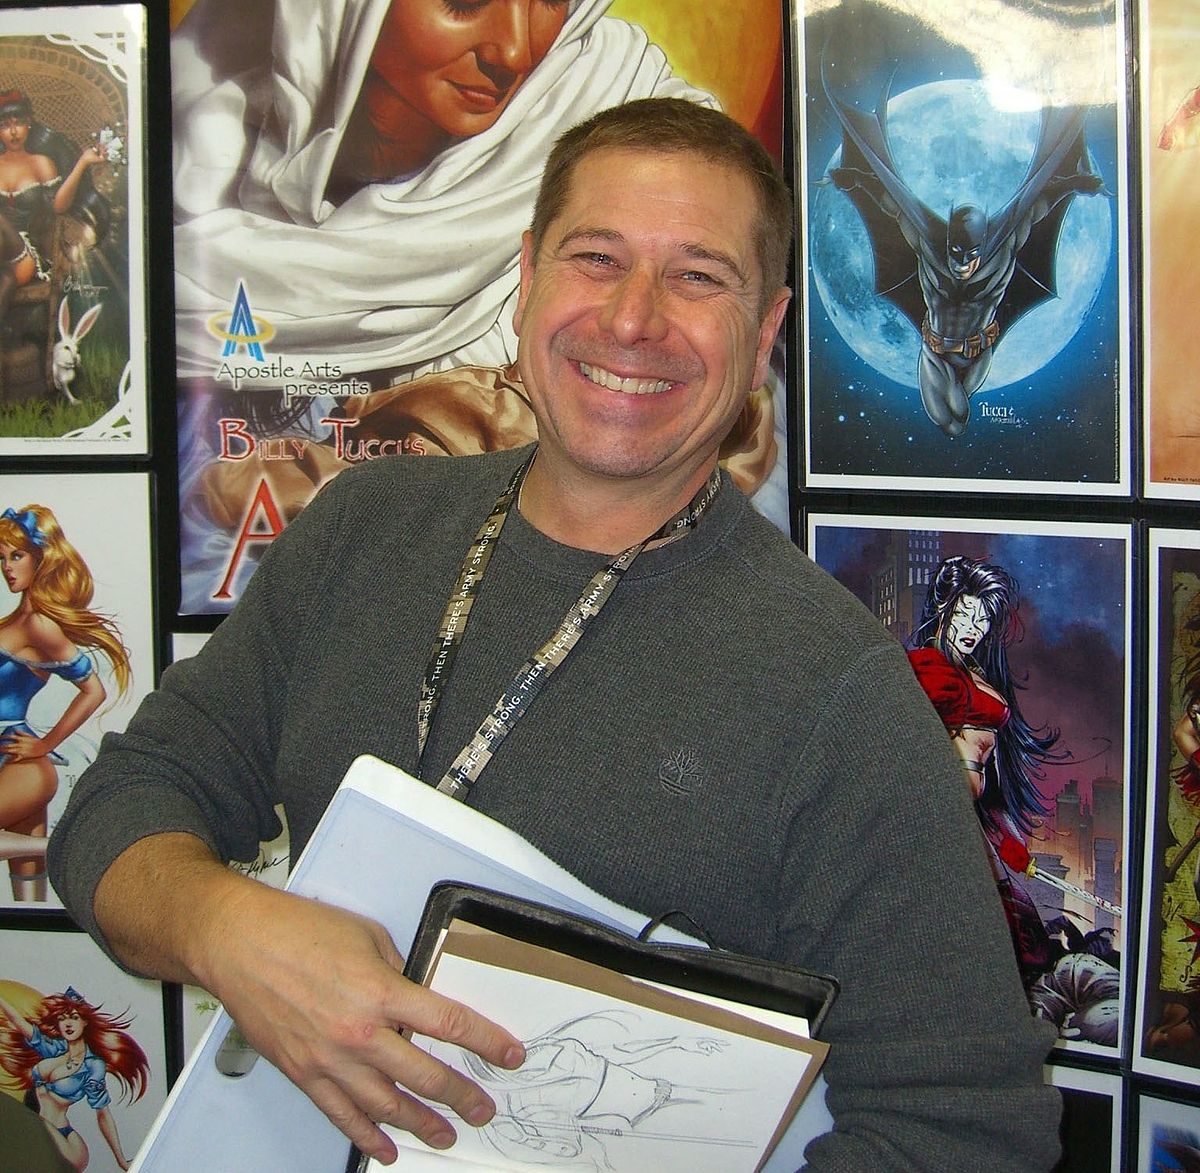 Billy Tucci is coming to Hawaii's best comic con